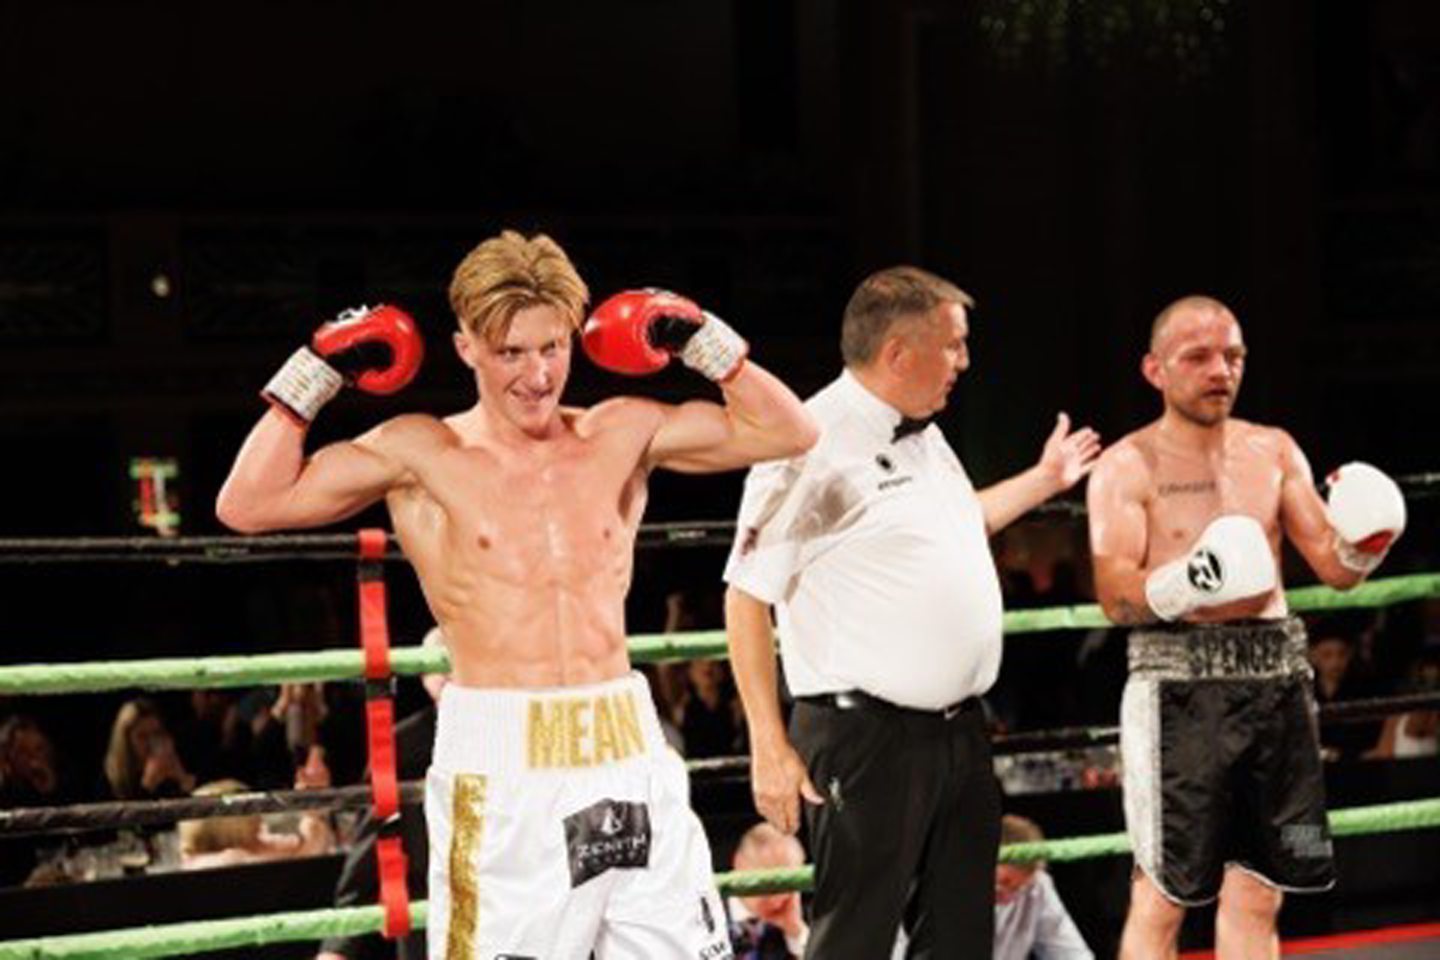 Undefeated Aberdeen boxer Gregor McPherson celebrates victory against John Spencer at the Beach Ballroom, Aberdeen.